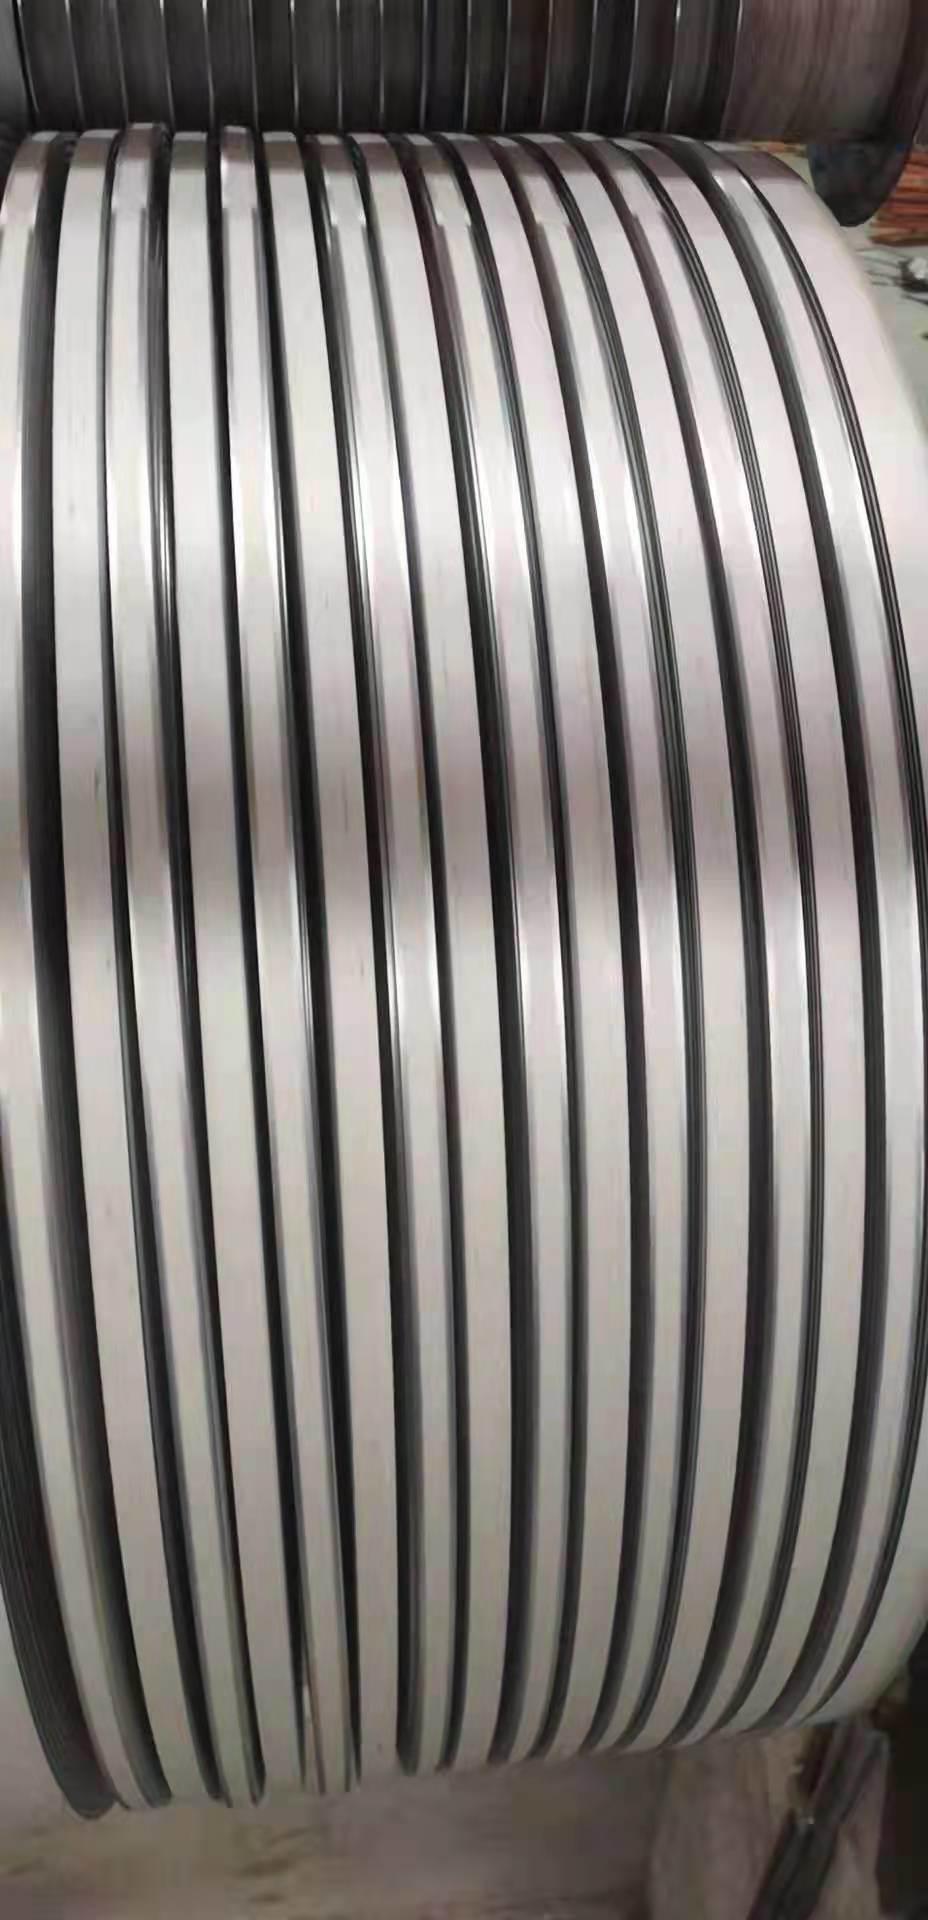 Made in China Good Sales High Quality Factory Price Best Price Steel Coil by China Supplier